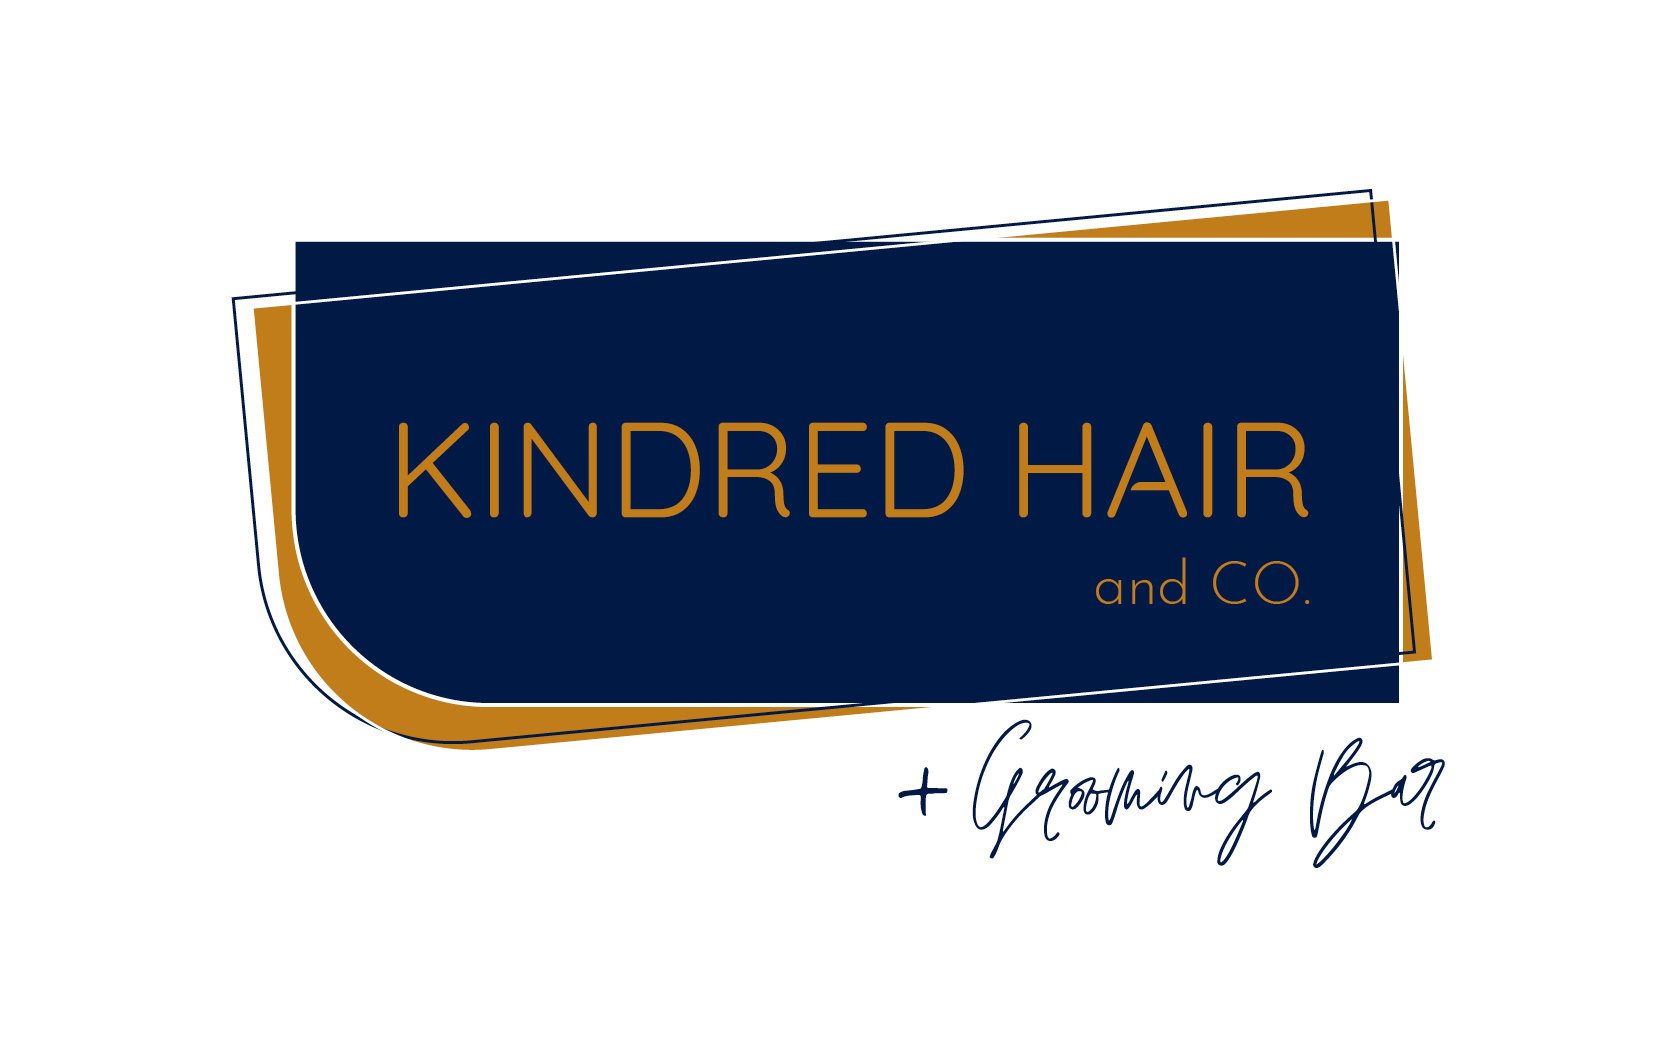 PS - BTM - Retailer Logos 800x500px - Kindred Hair and Co